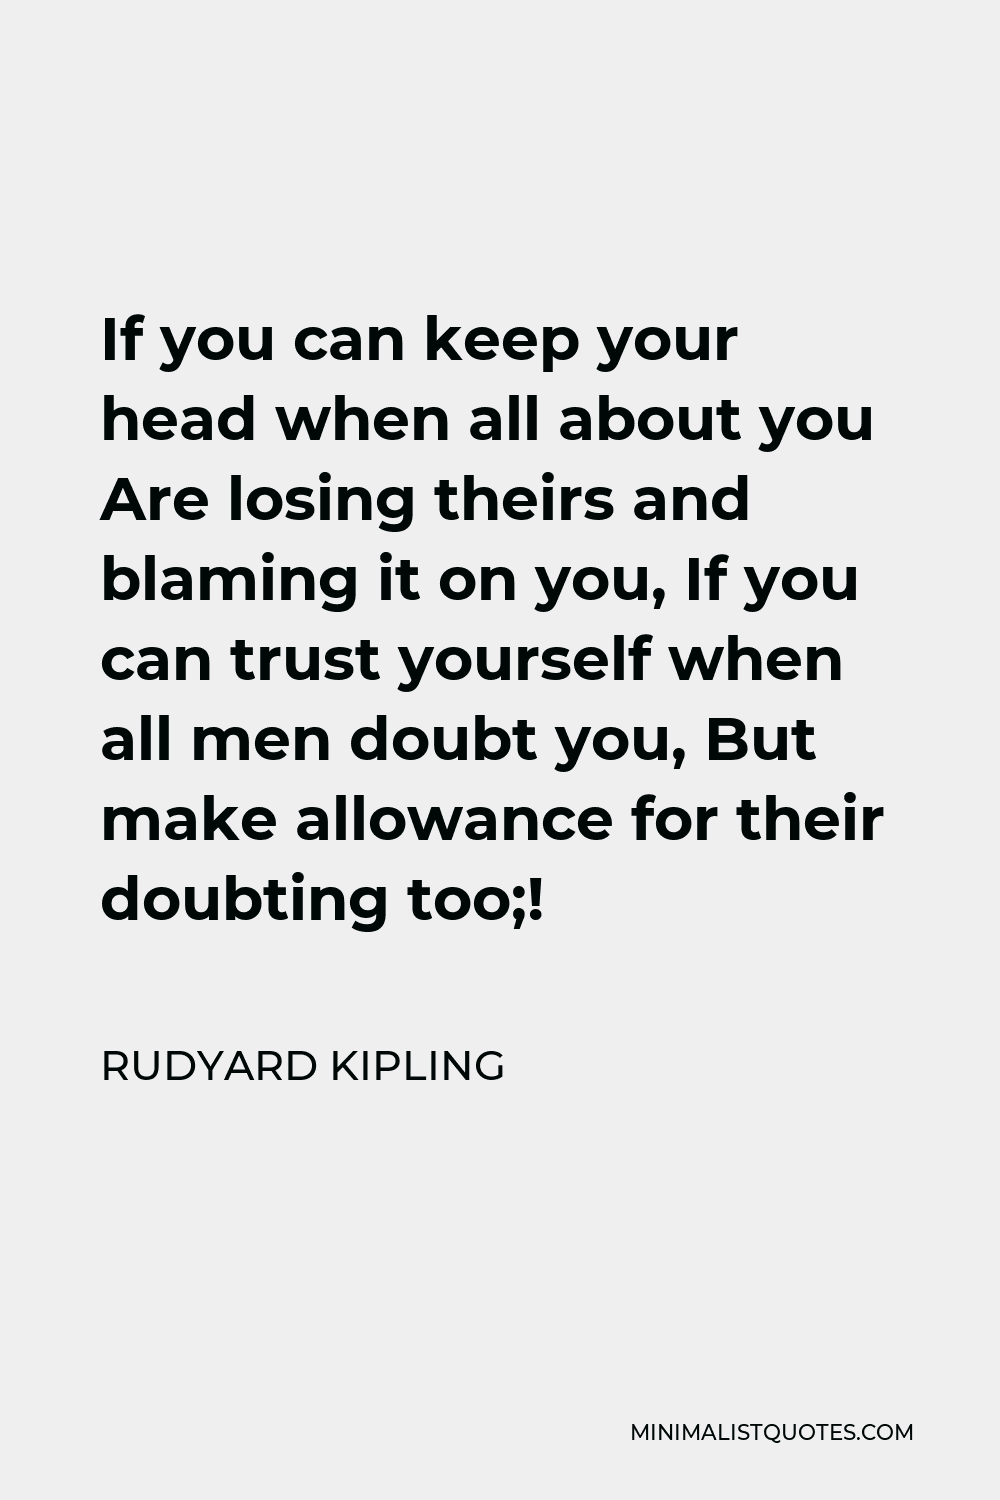 Rudyard Kipling Quote - If you can keep your head when all about you Are losing theirs and blaming it on you, If you can trust yourself when all men doubt you, But make allowance for their doubting too;!